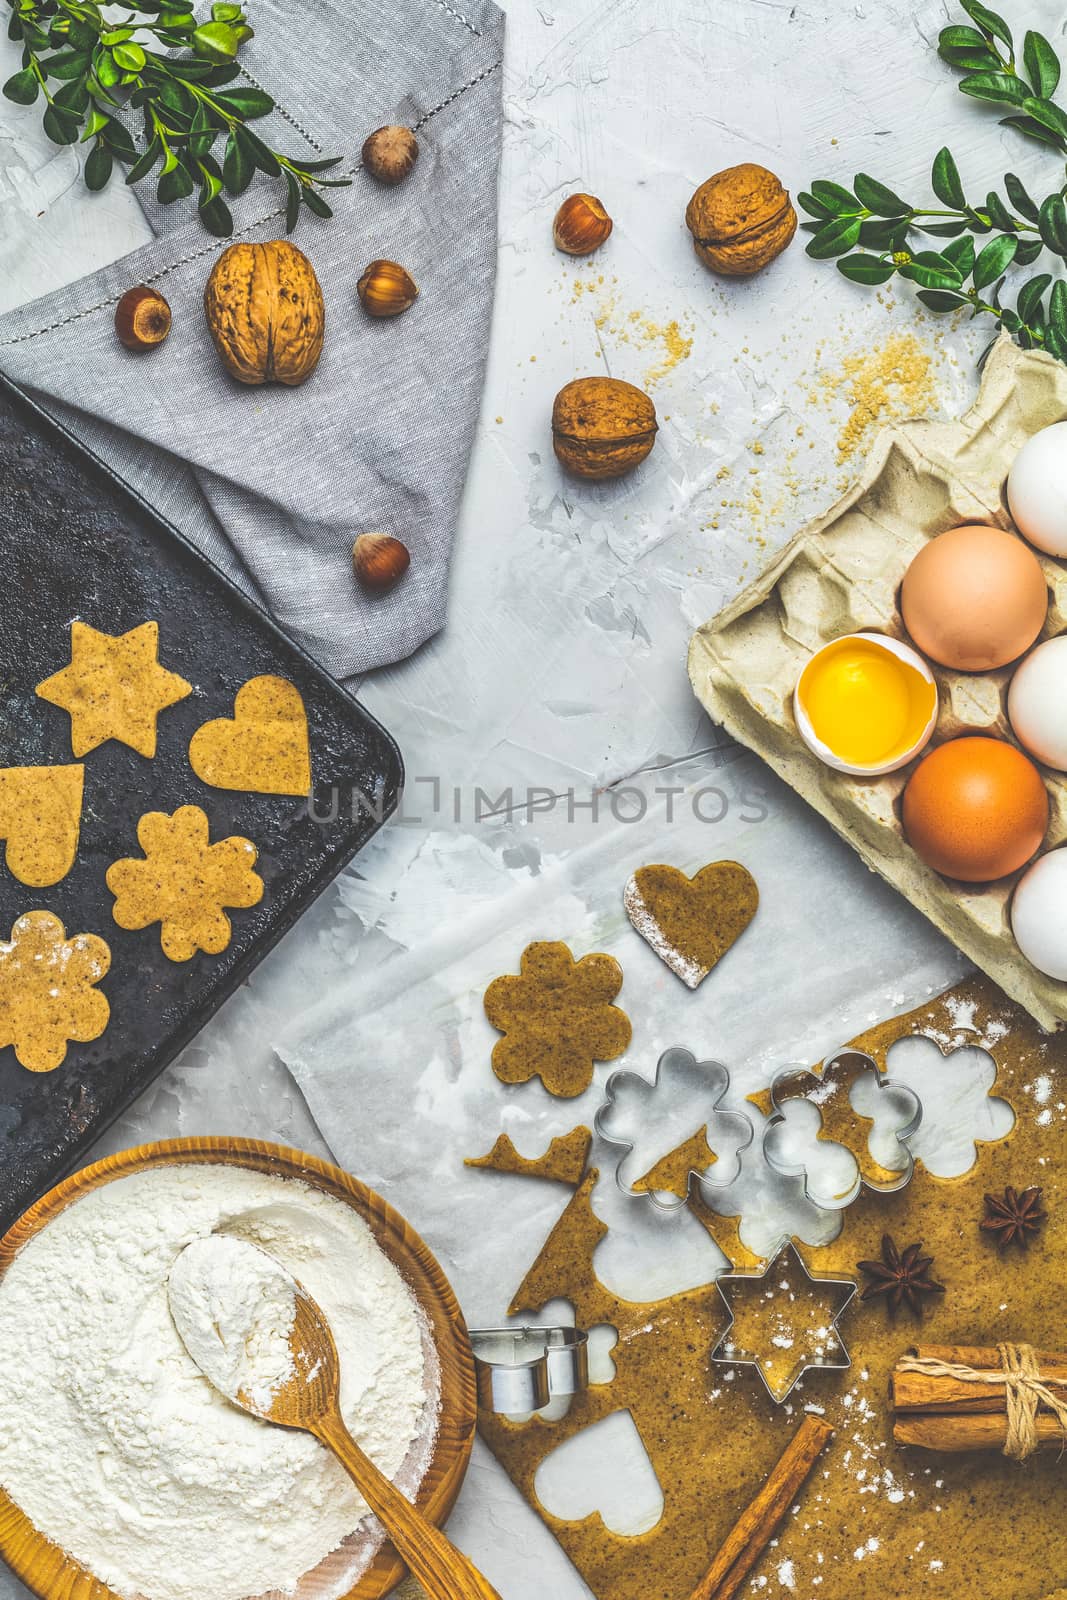 Culinary Spring or Christmas food background. Ingredients for ginger cookies. Dough for baking, brown sugar, flour, eggs. View from above.